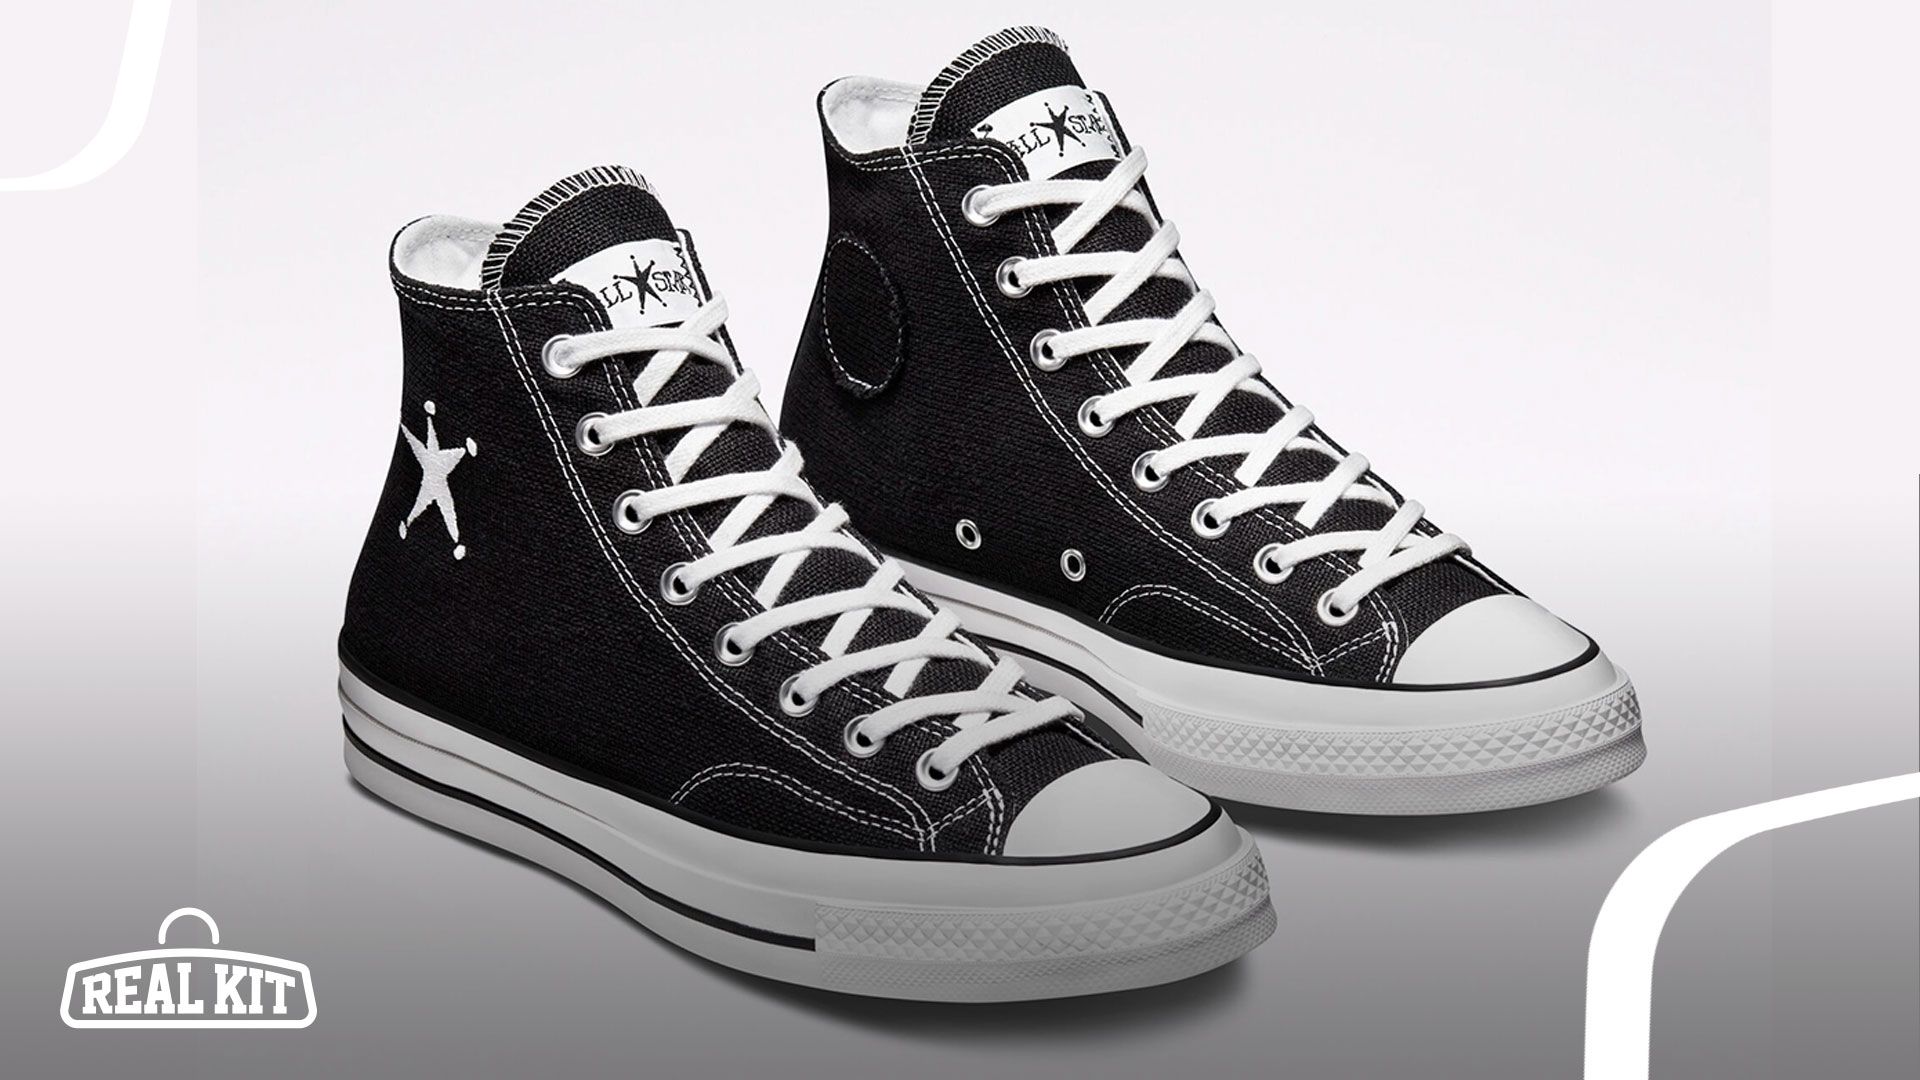 Stüssy x Converse Chuck 70 Hi OUT NOW: Release Date, Price, And 